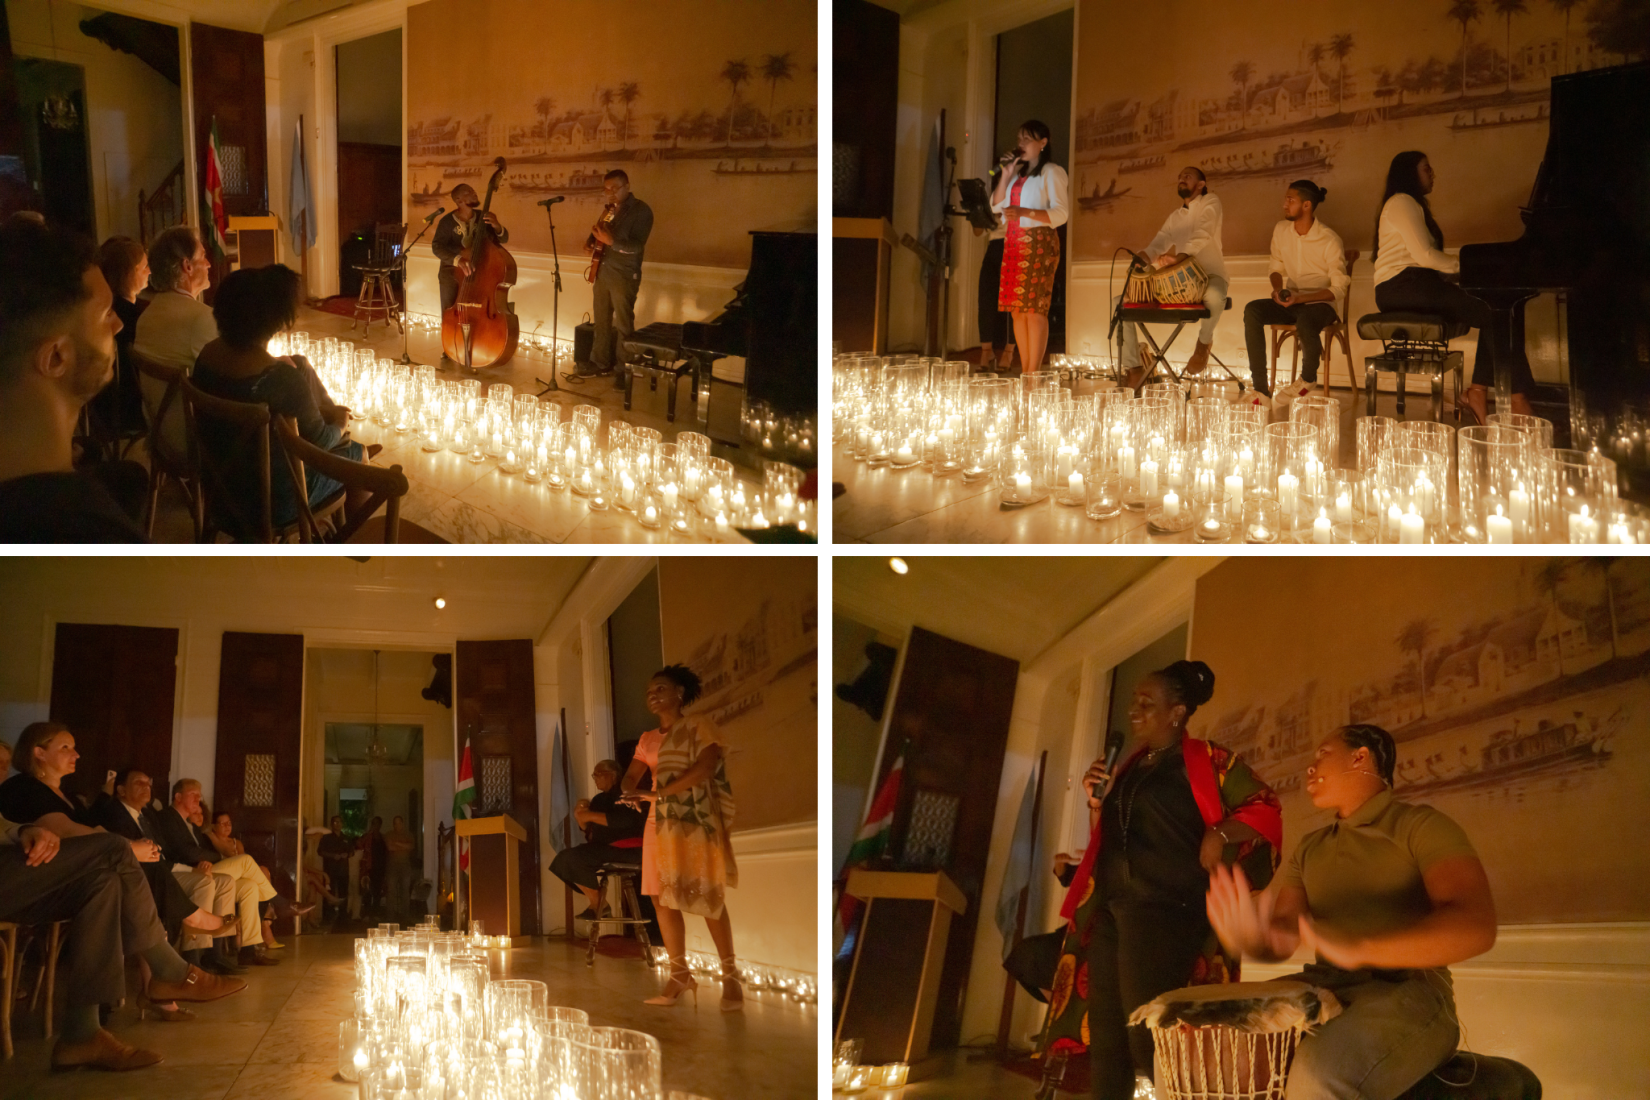 Collage of performances during the UN75 commemoration in Suriname